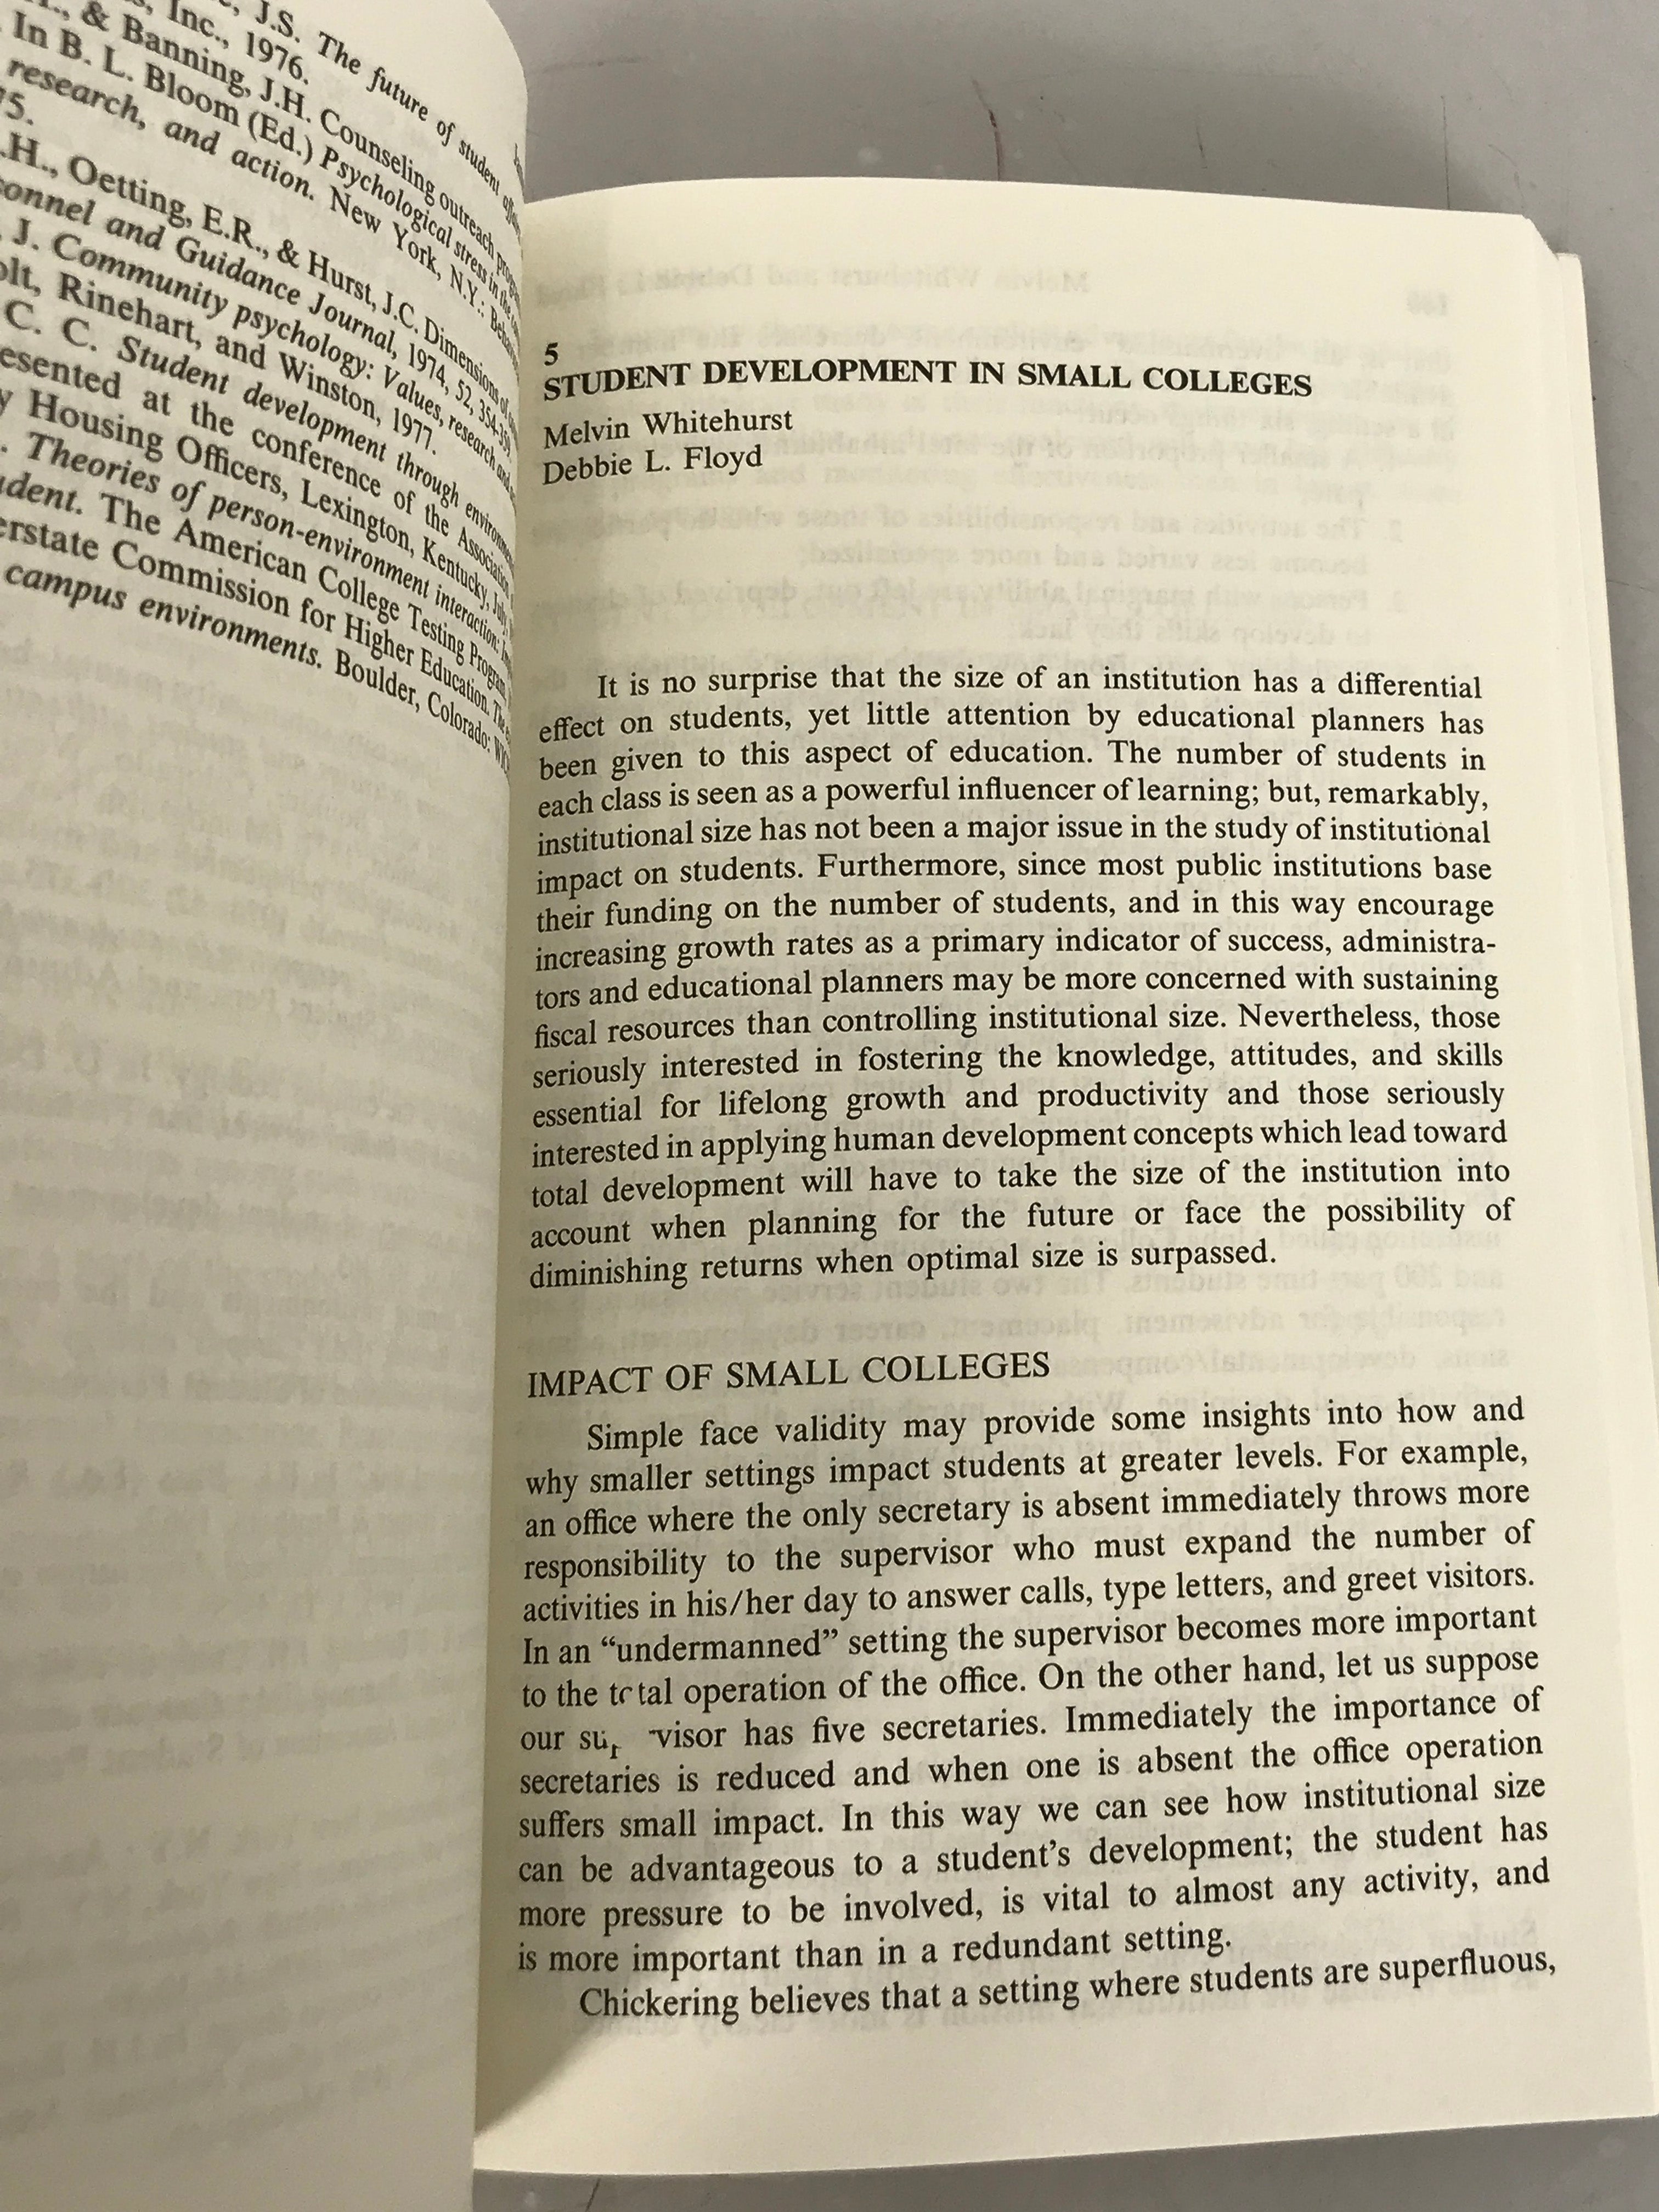 Student Development in Higher Education by Don Creamer 1980 SC